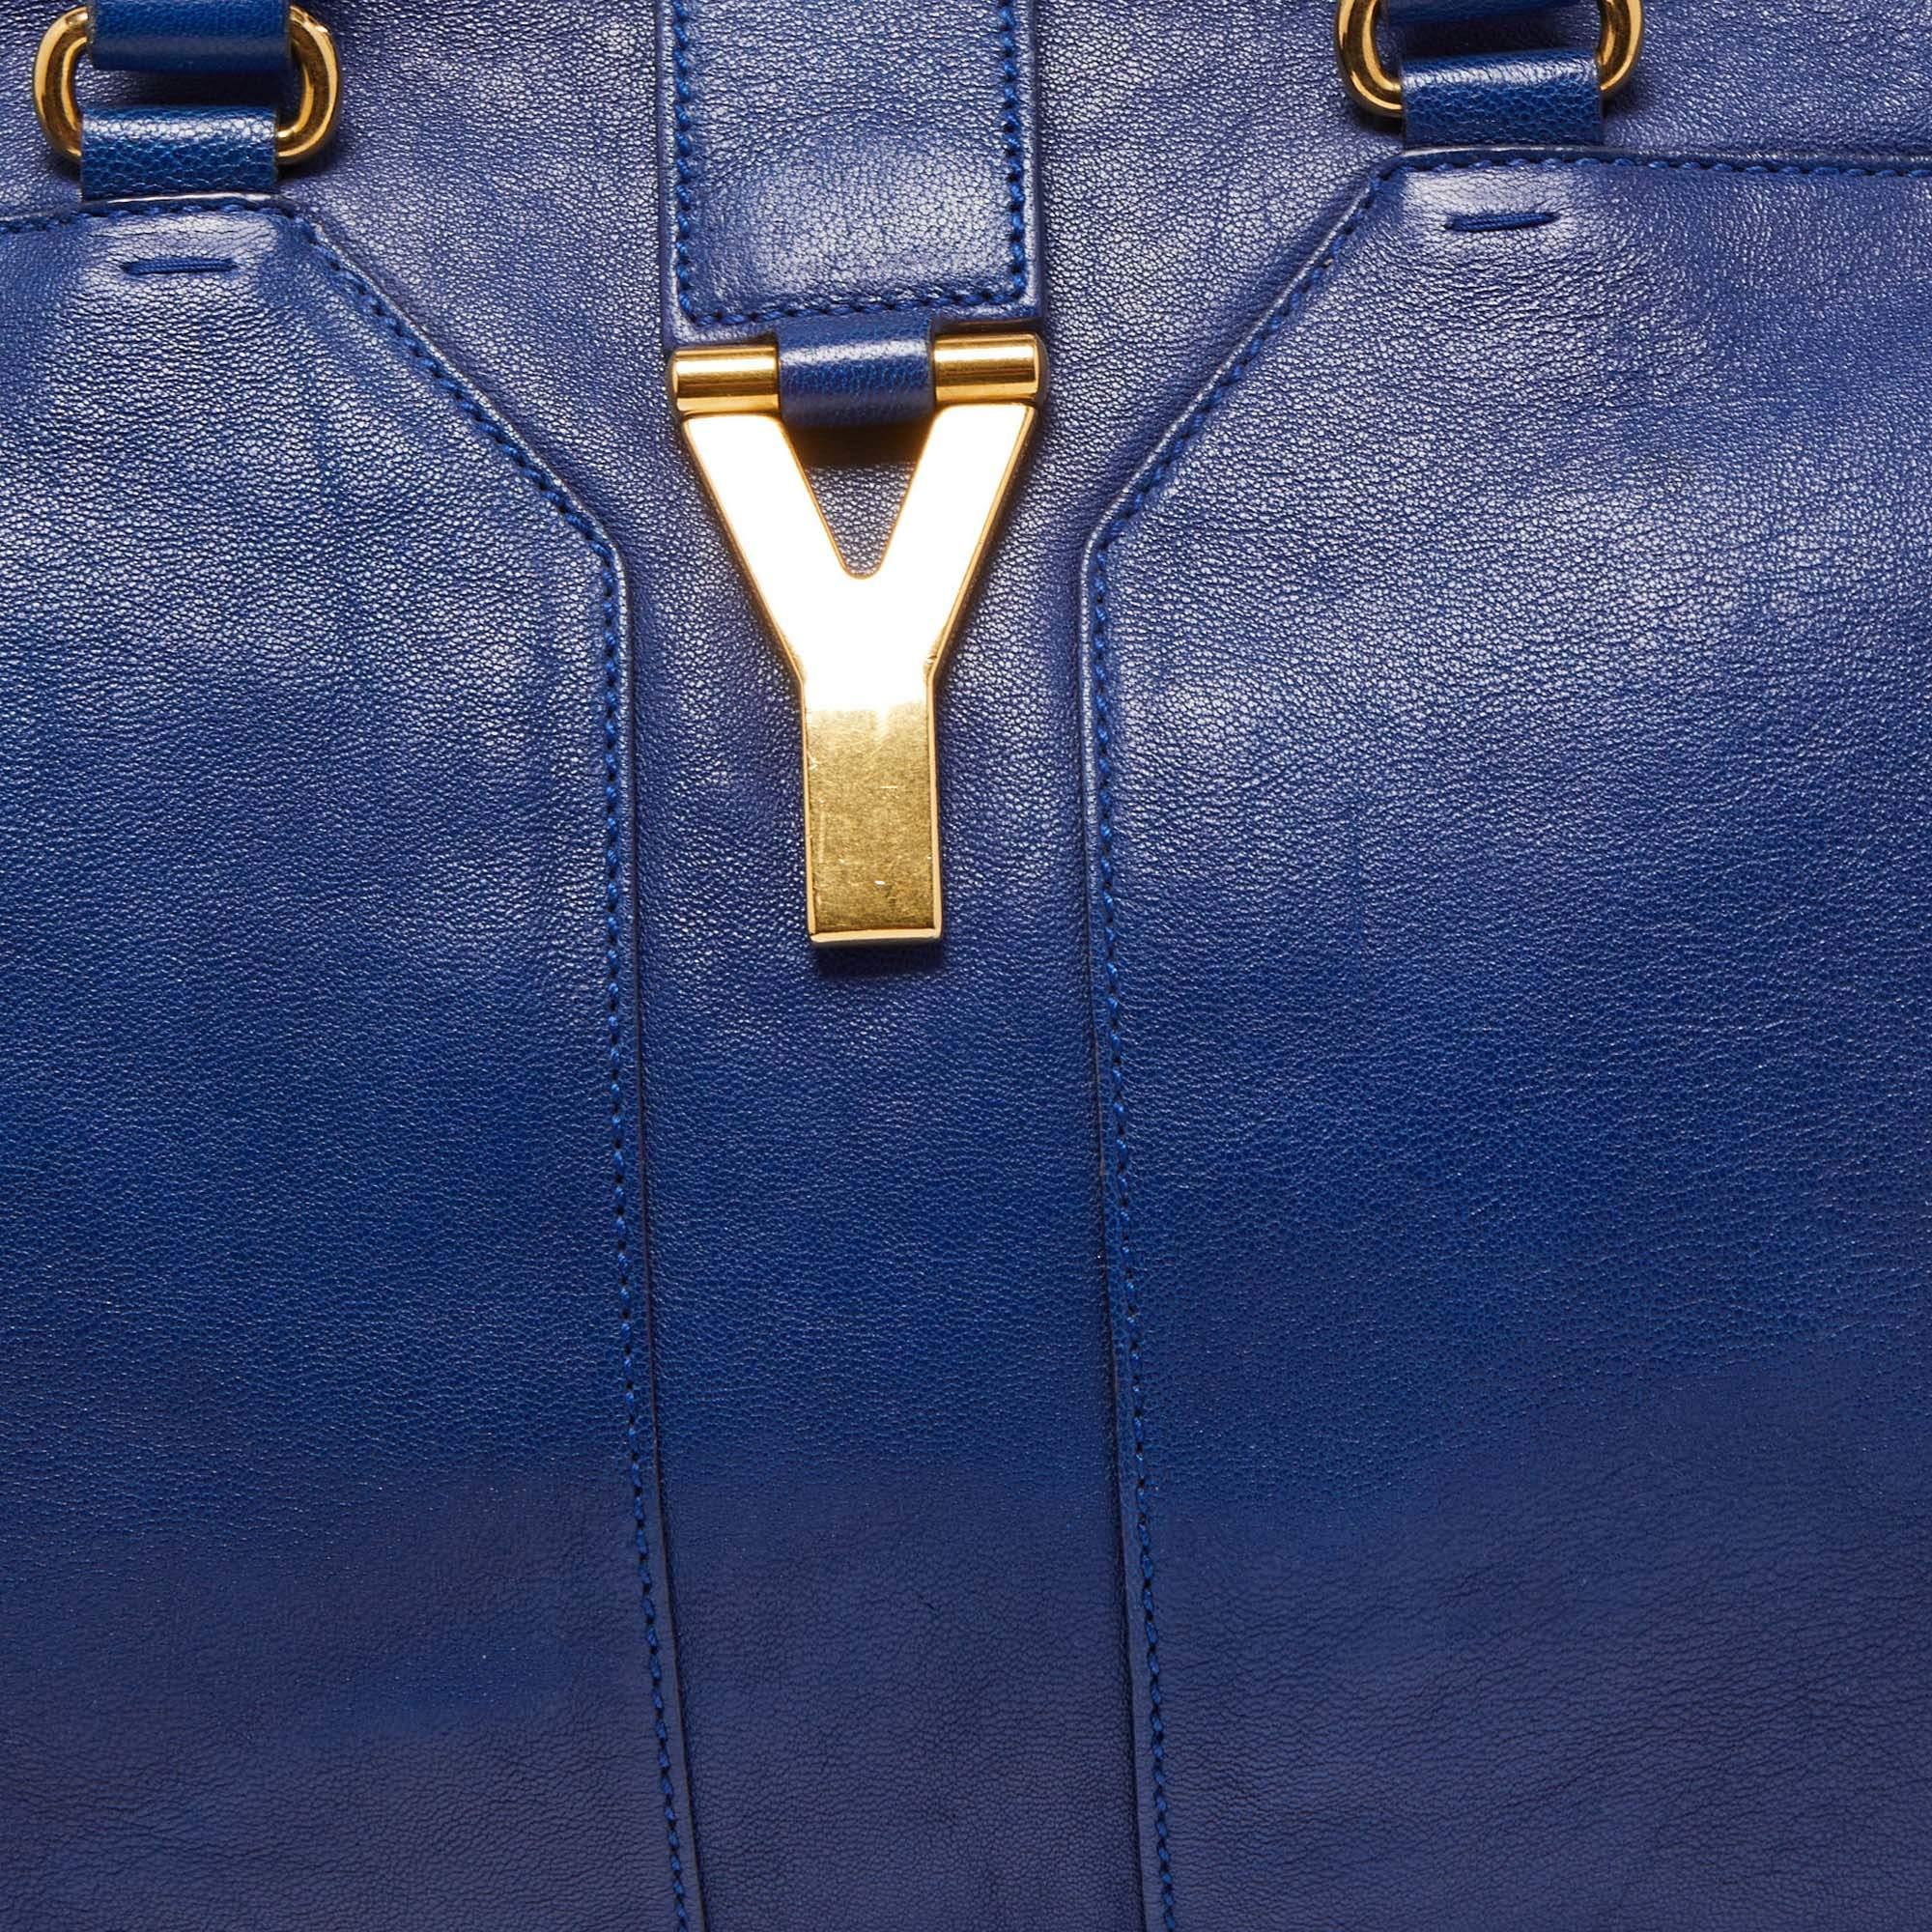 Yves Saint Laurent Blue Leather Medium Cabas Chyc Tote For Sale 8